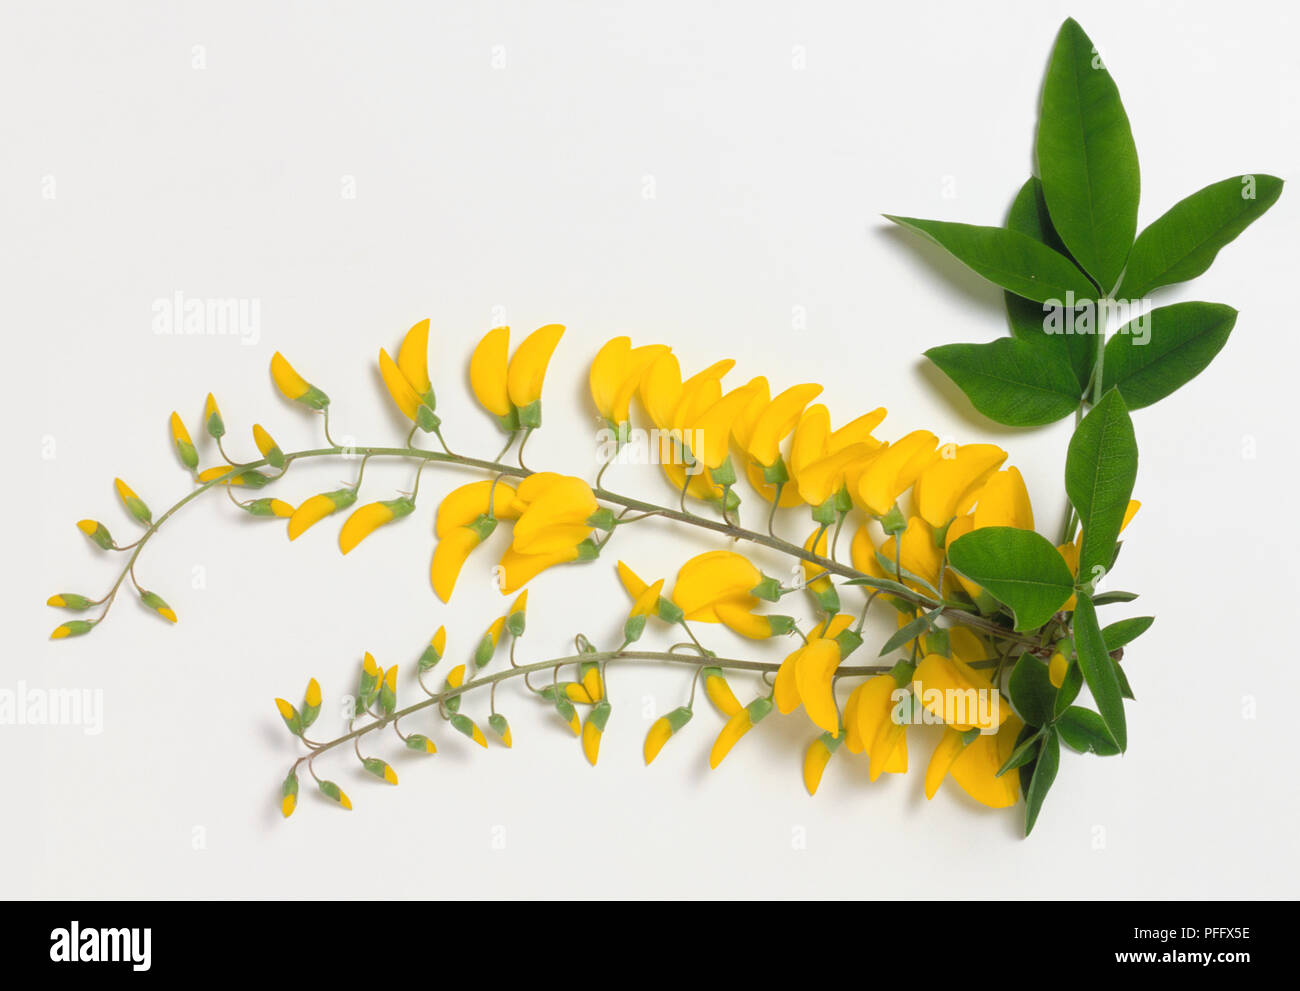 Leguminosae, Laburnum anagyroides, dull grey-green leaves, with pea-like, yellow flowers borne in short, hanging racemes. Stock Photo